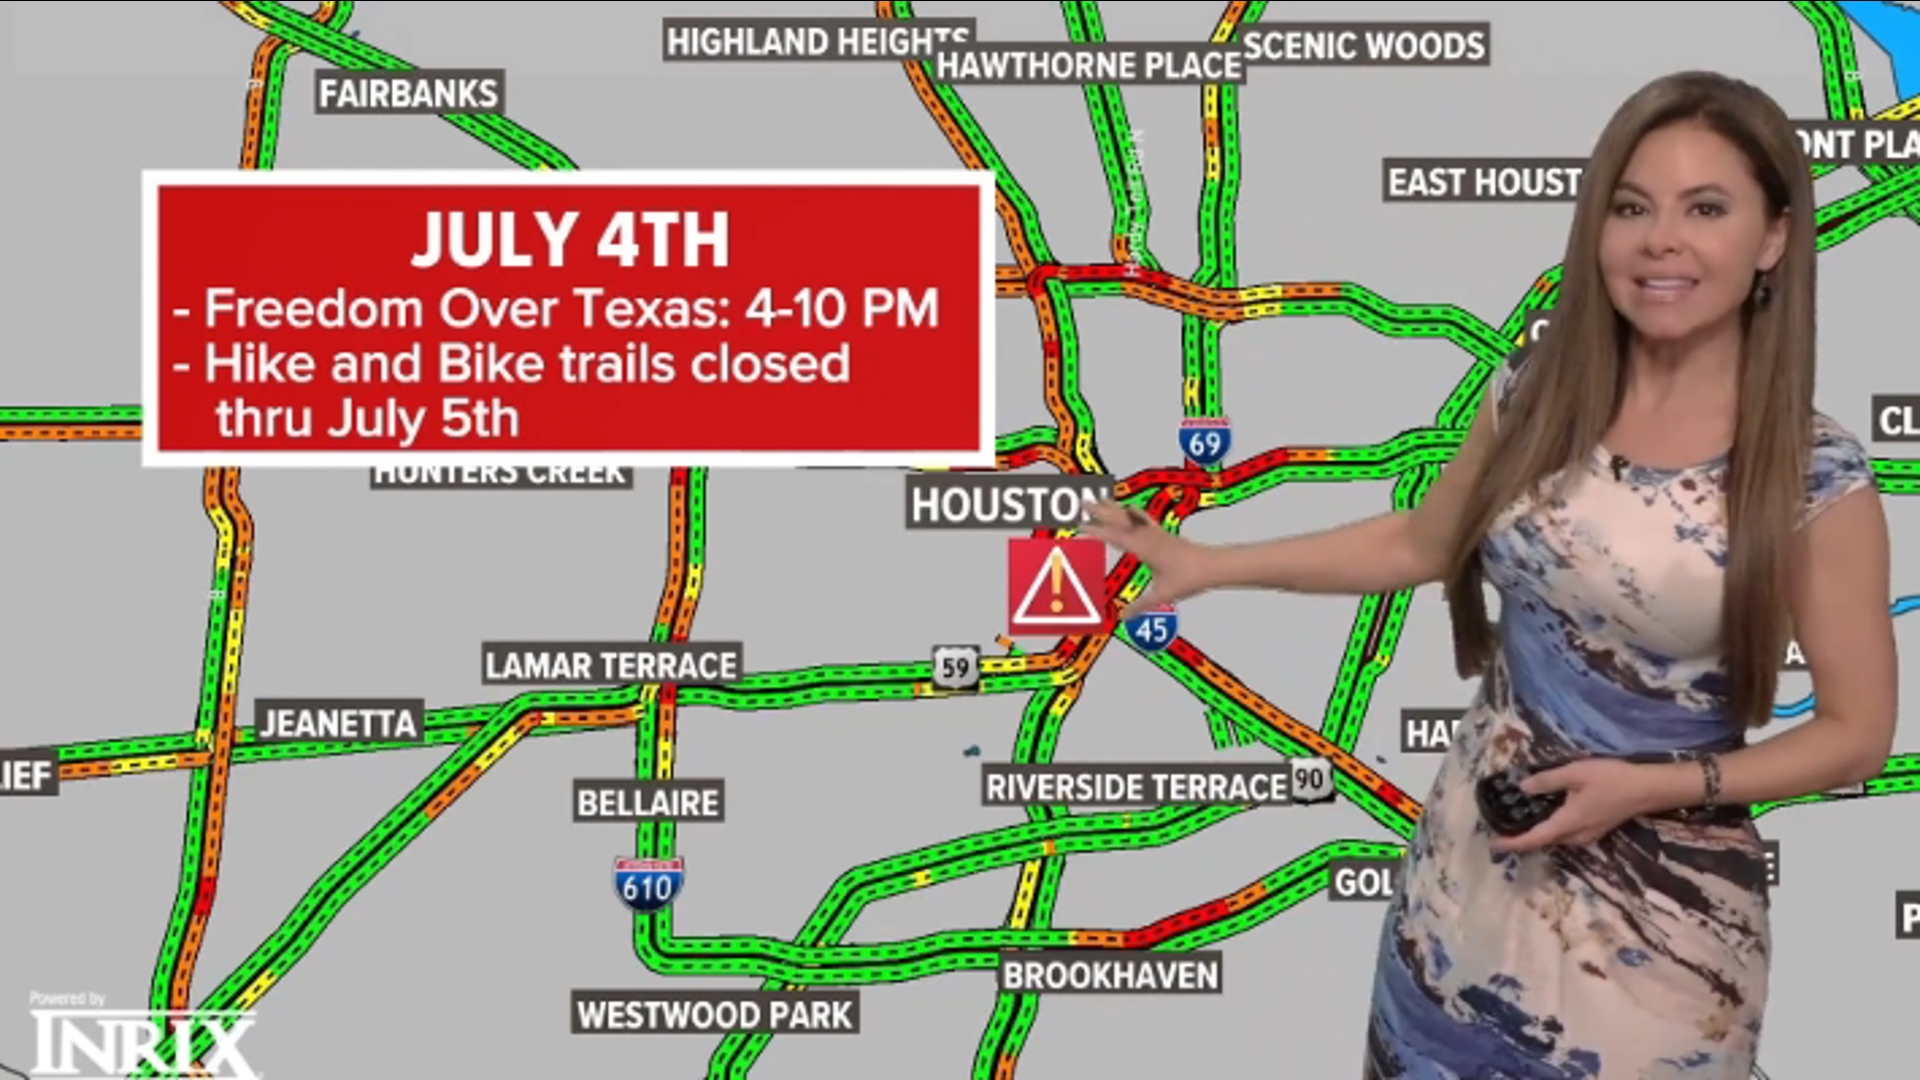 Tens of thousands of people will head to Eleanor Tinsley Park on Allen Parkway for the 4th of July. Anyone going downtown this week needs to check this list first!